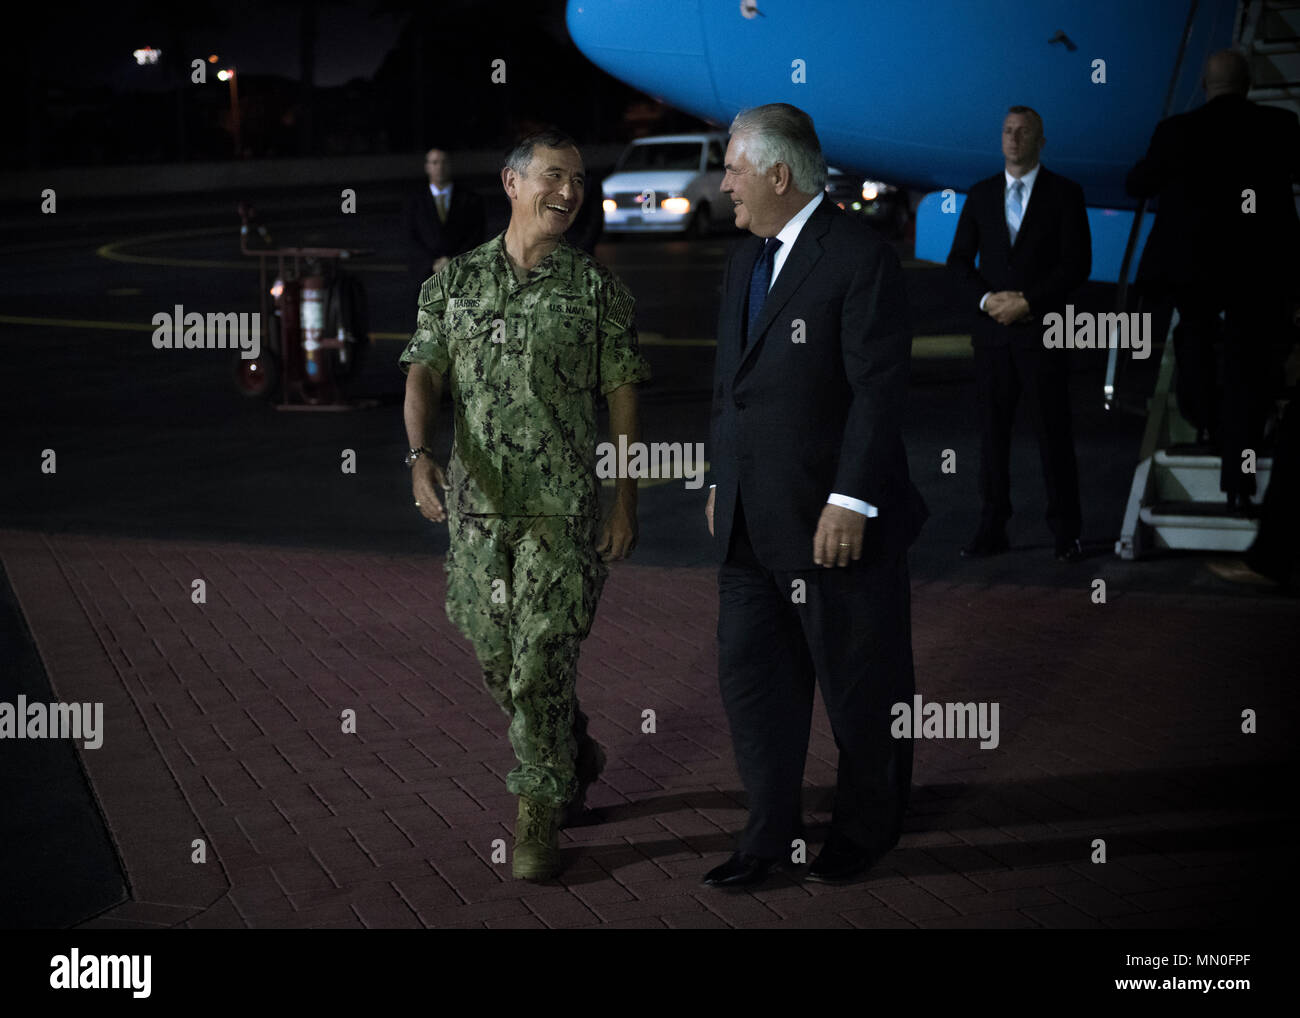 170803-N-ON707-063JOINT BASE PEARL HARBOR-HICKAM, Hawaii (August 3, 2017)— Adm. Harry Harris, Commander of U.S. Pacific Command (PACOM), welcomes U.S. Secretary of State Rex Tillerson after his arrival at Hickam Airfield. Secretary Tillerson is traveling to Manila, Bangkok, and Kuala Lumpur to meet with his counterparts and discuss a range of issues including the denuclearization of the Korean Peninsula, maritime security, and counterterrorism.  Secretary Tillerson’s travel reaffirms the Administration’s commitment to further broaden and enhance U.S. economic and security interests in the Indo Stock Photo